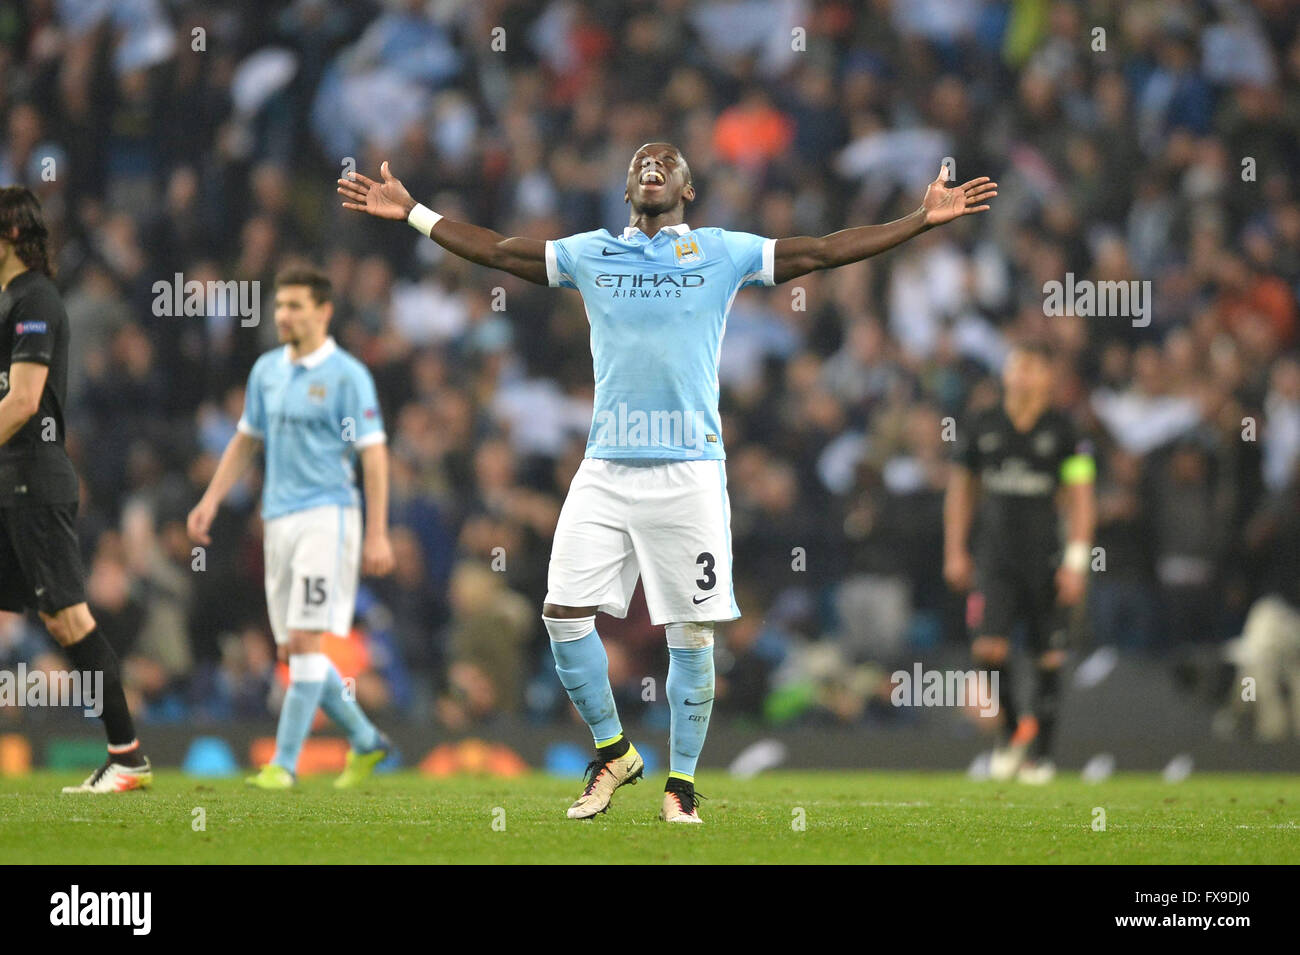 Man City with win before quarter-final second leg